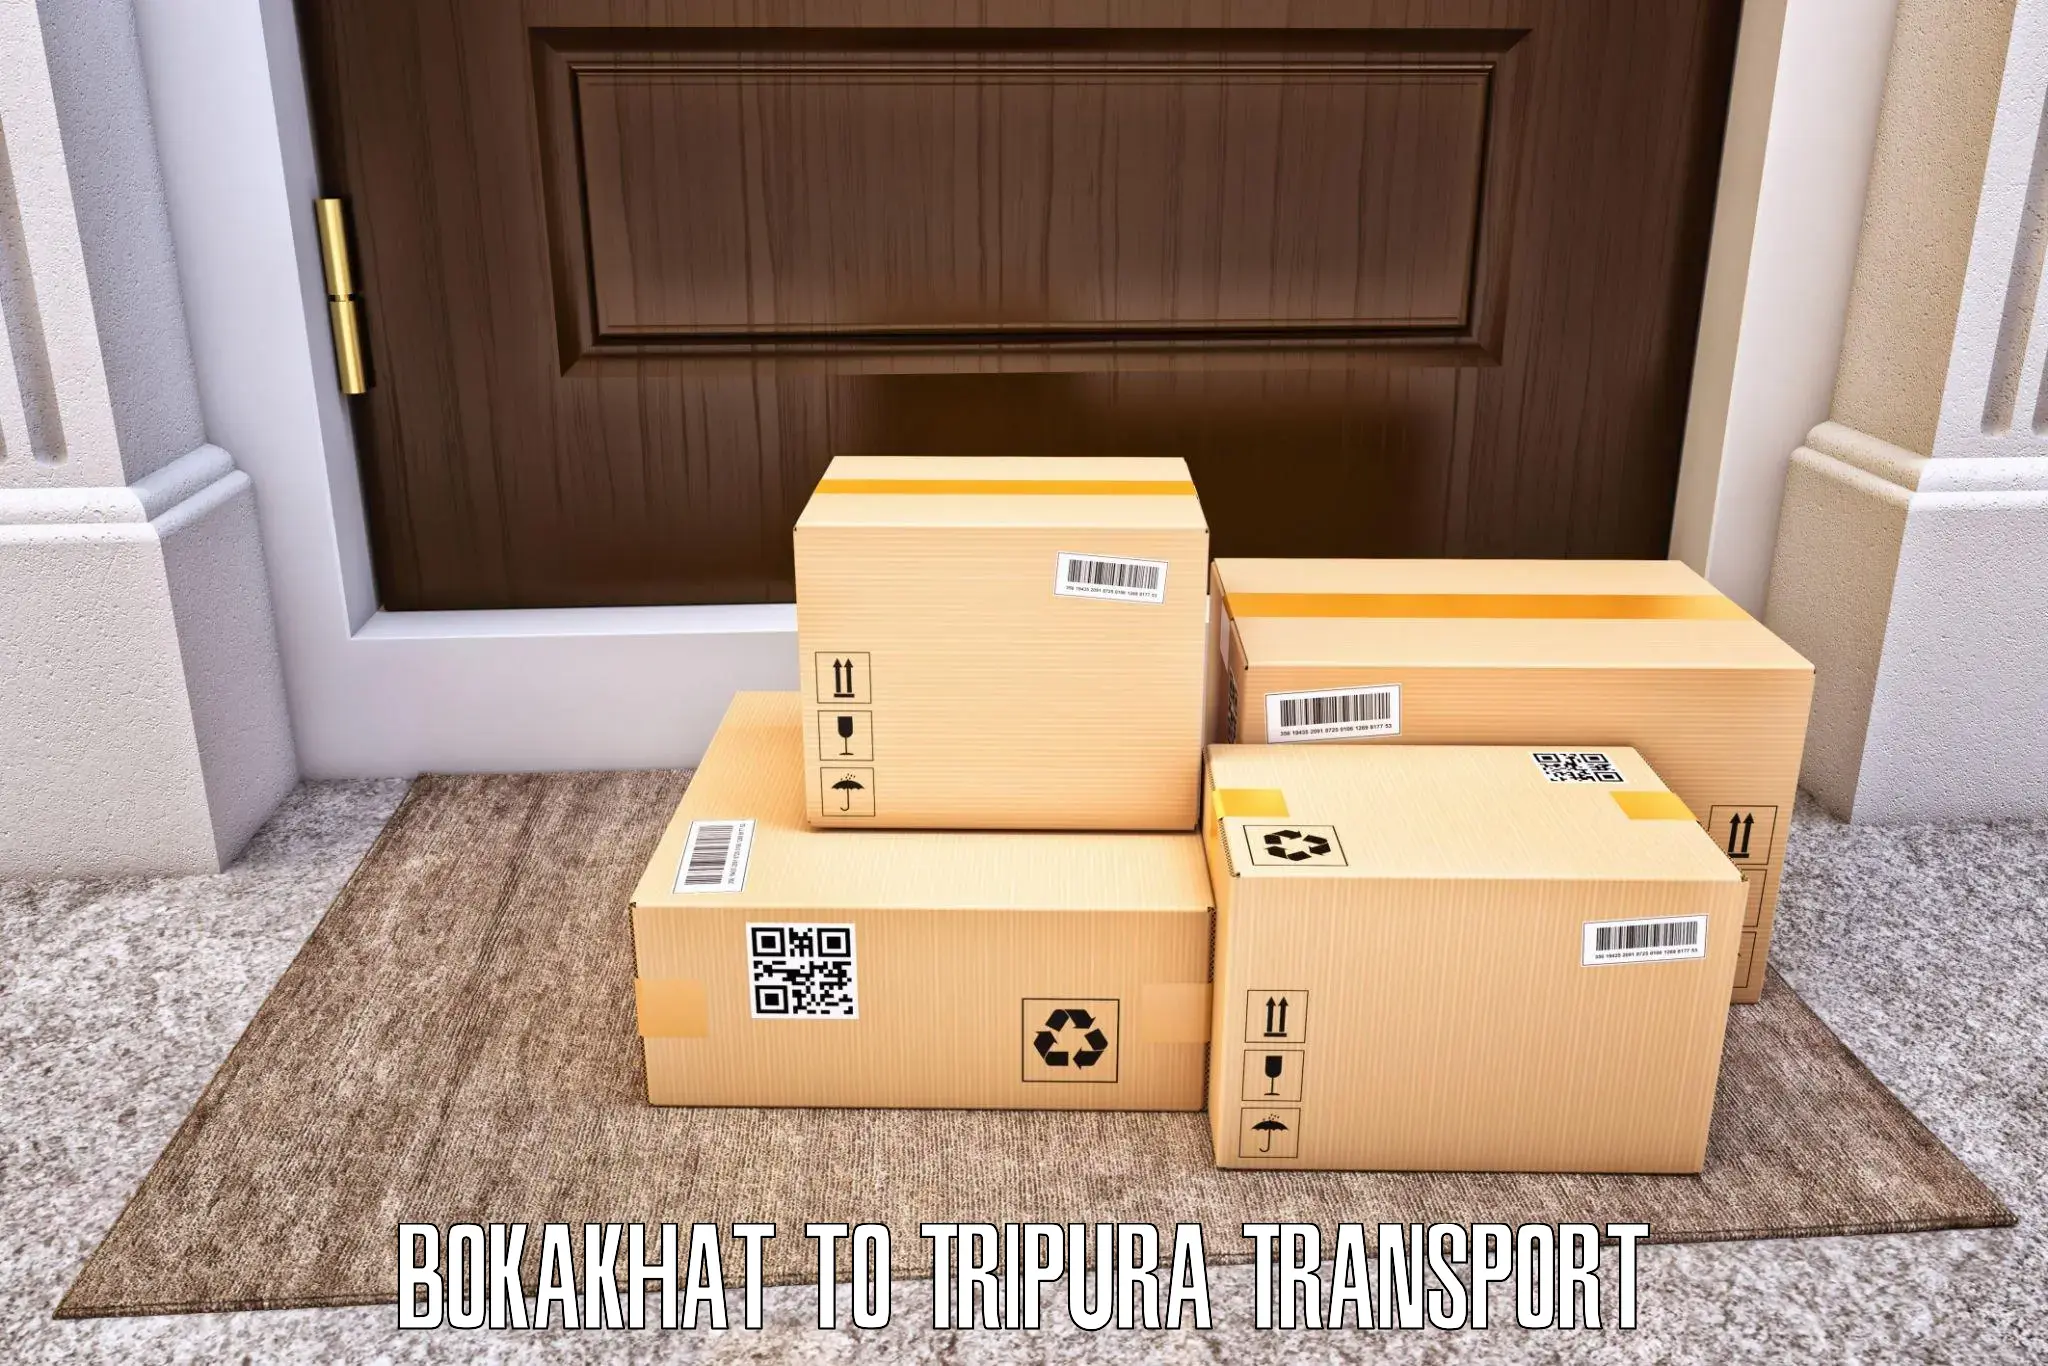 Truck transport companies in India Bokakhat to Amarpur